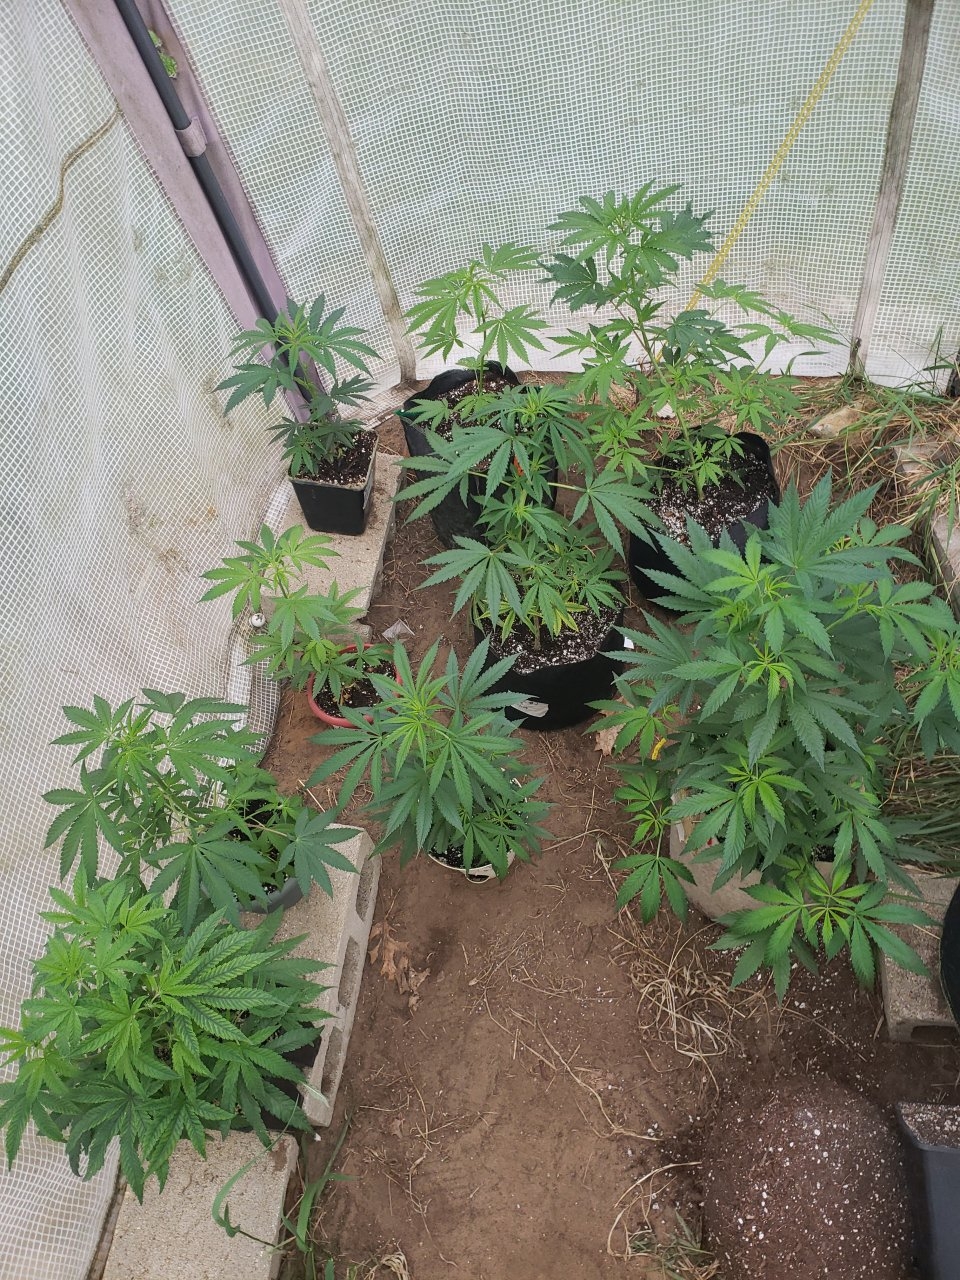 Outdoor girls mostly GSC clones I think 8 of them in there